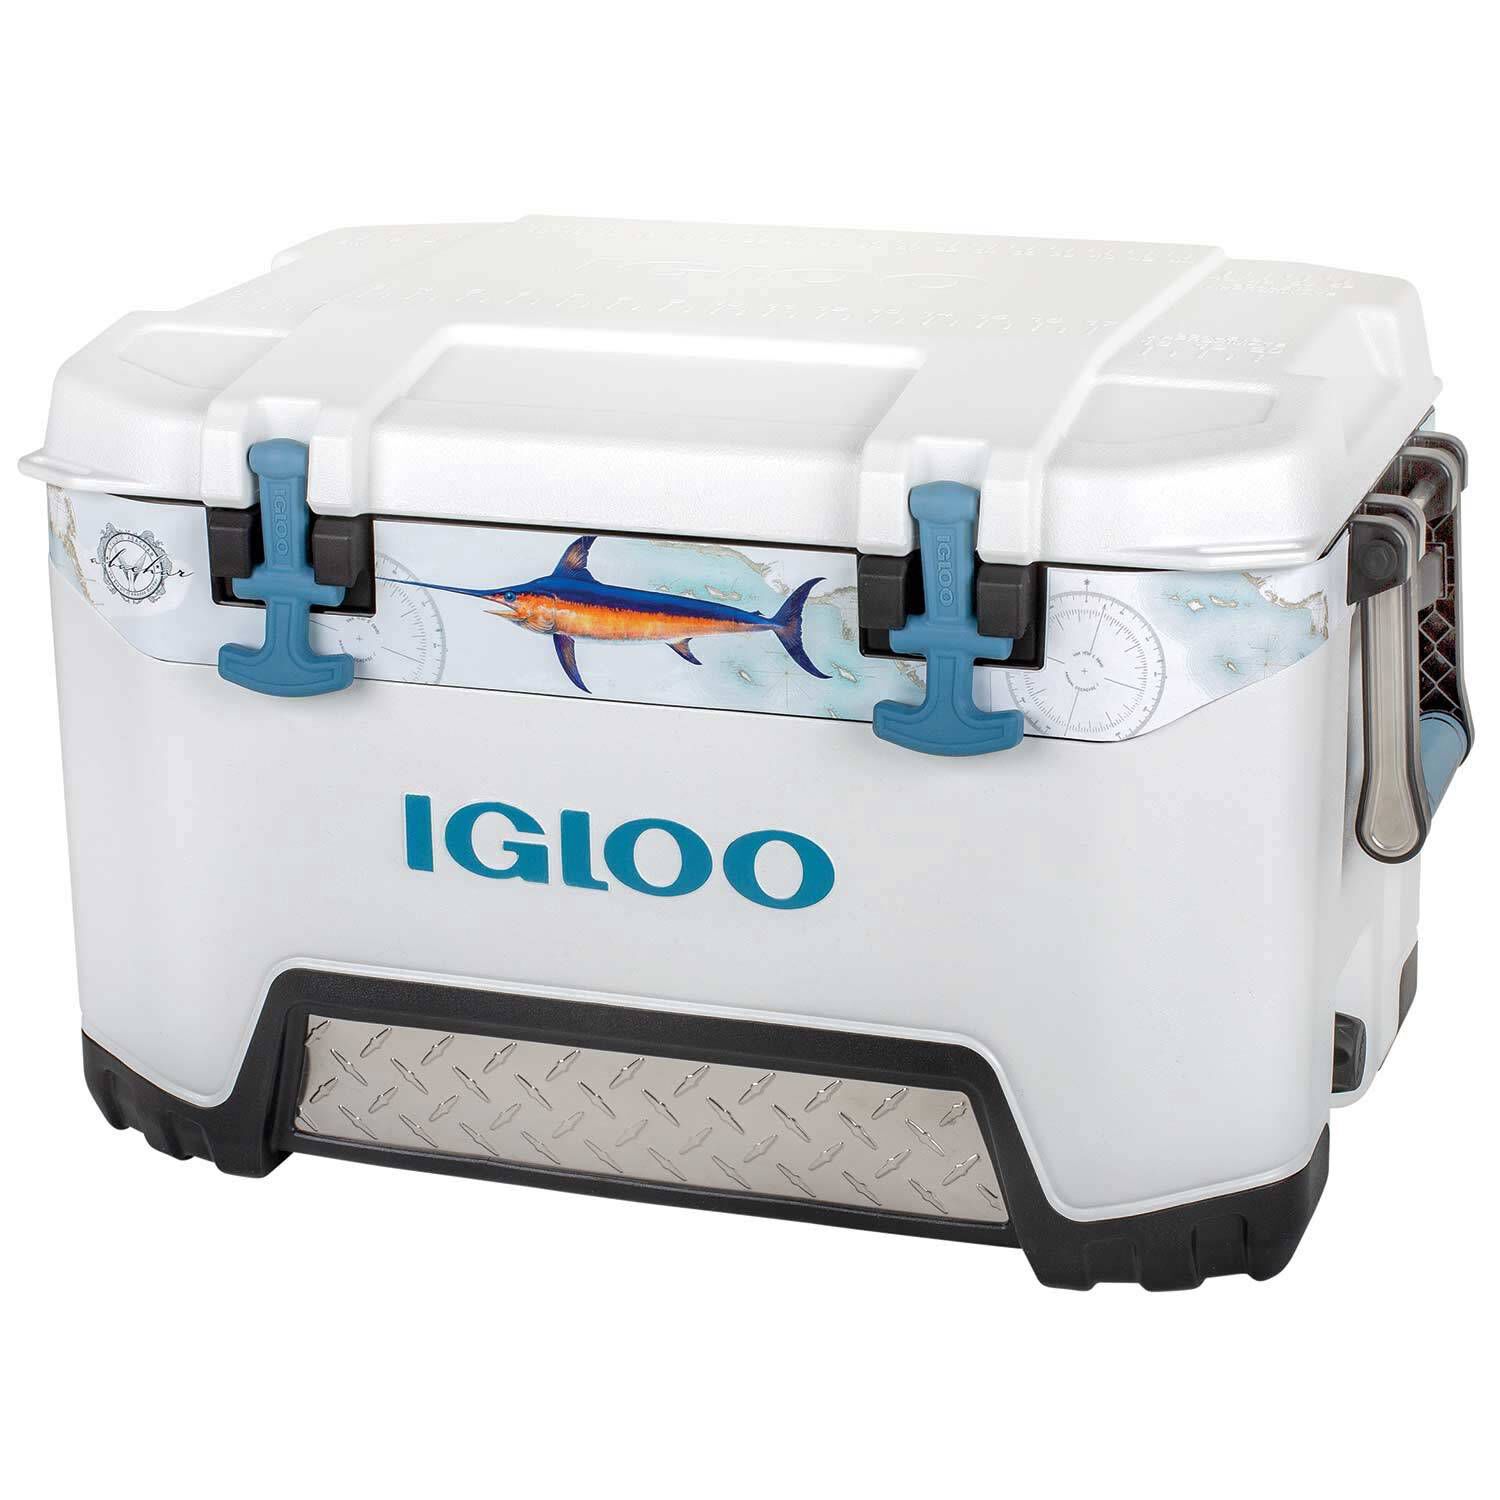 Large Igloo Cooler Ice Chest Tailgating Marine Camping Fishing Boating Beach NEW 